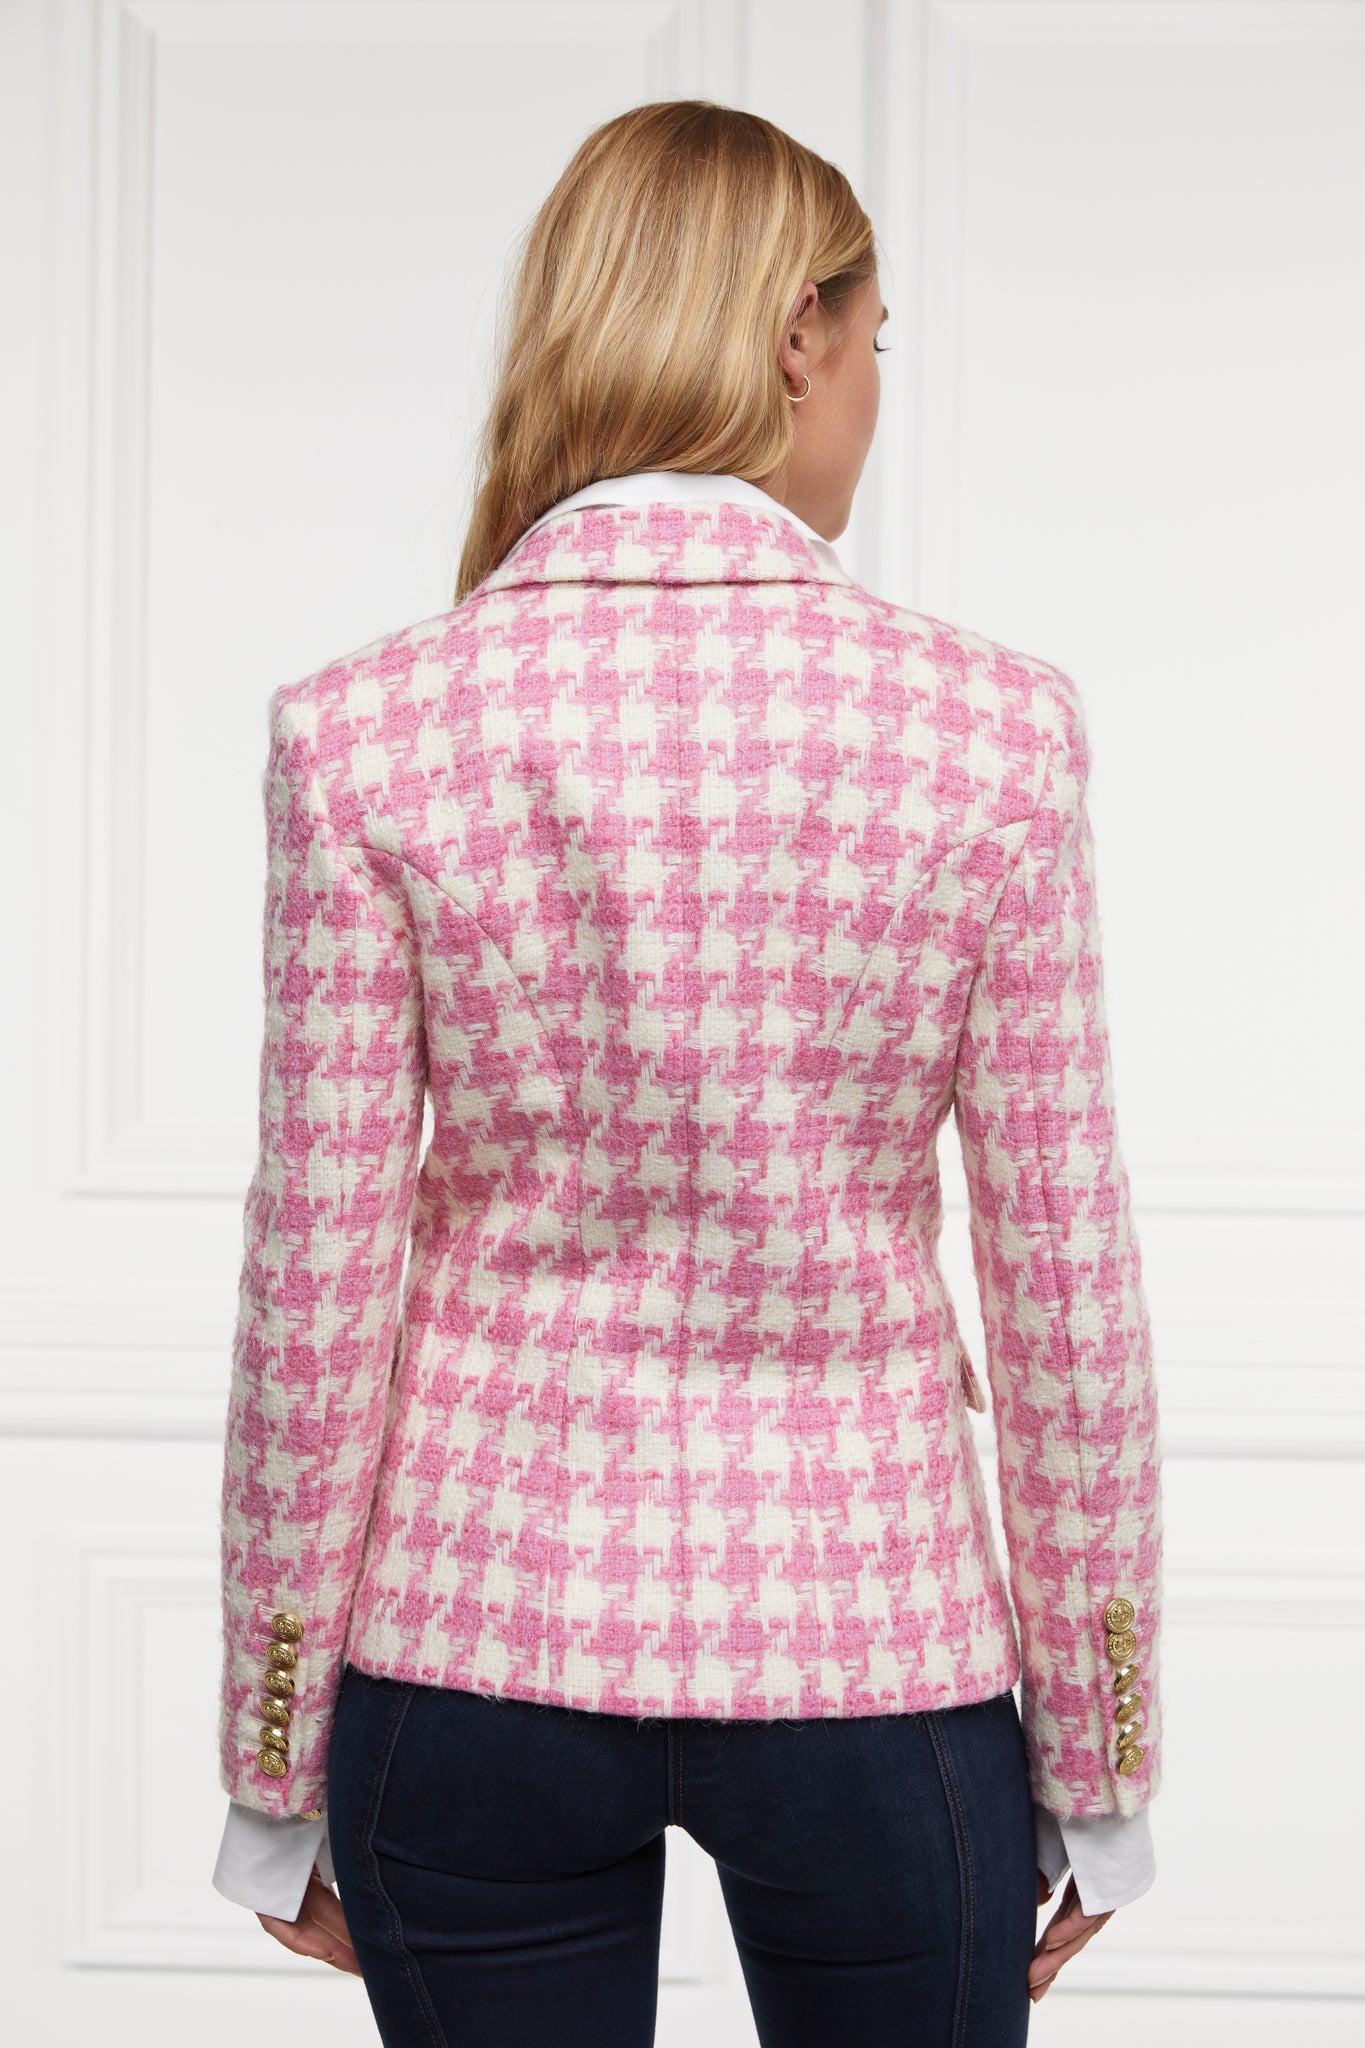 back of pink and white large scale houndstooth fitted blazer double breasted style but with only single button fastening to the one central button for more form fitted tailored look finished with two pockets at hips and gold button details on front and cuffs